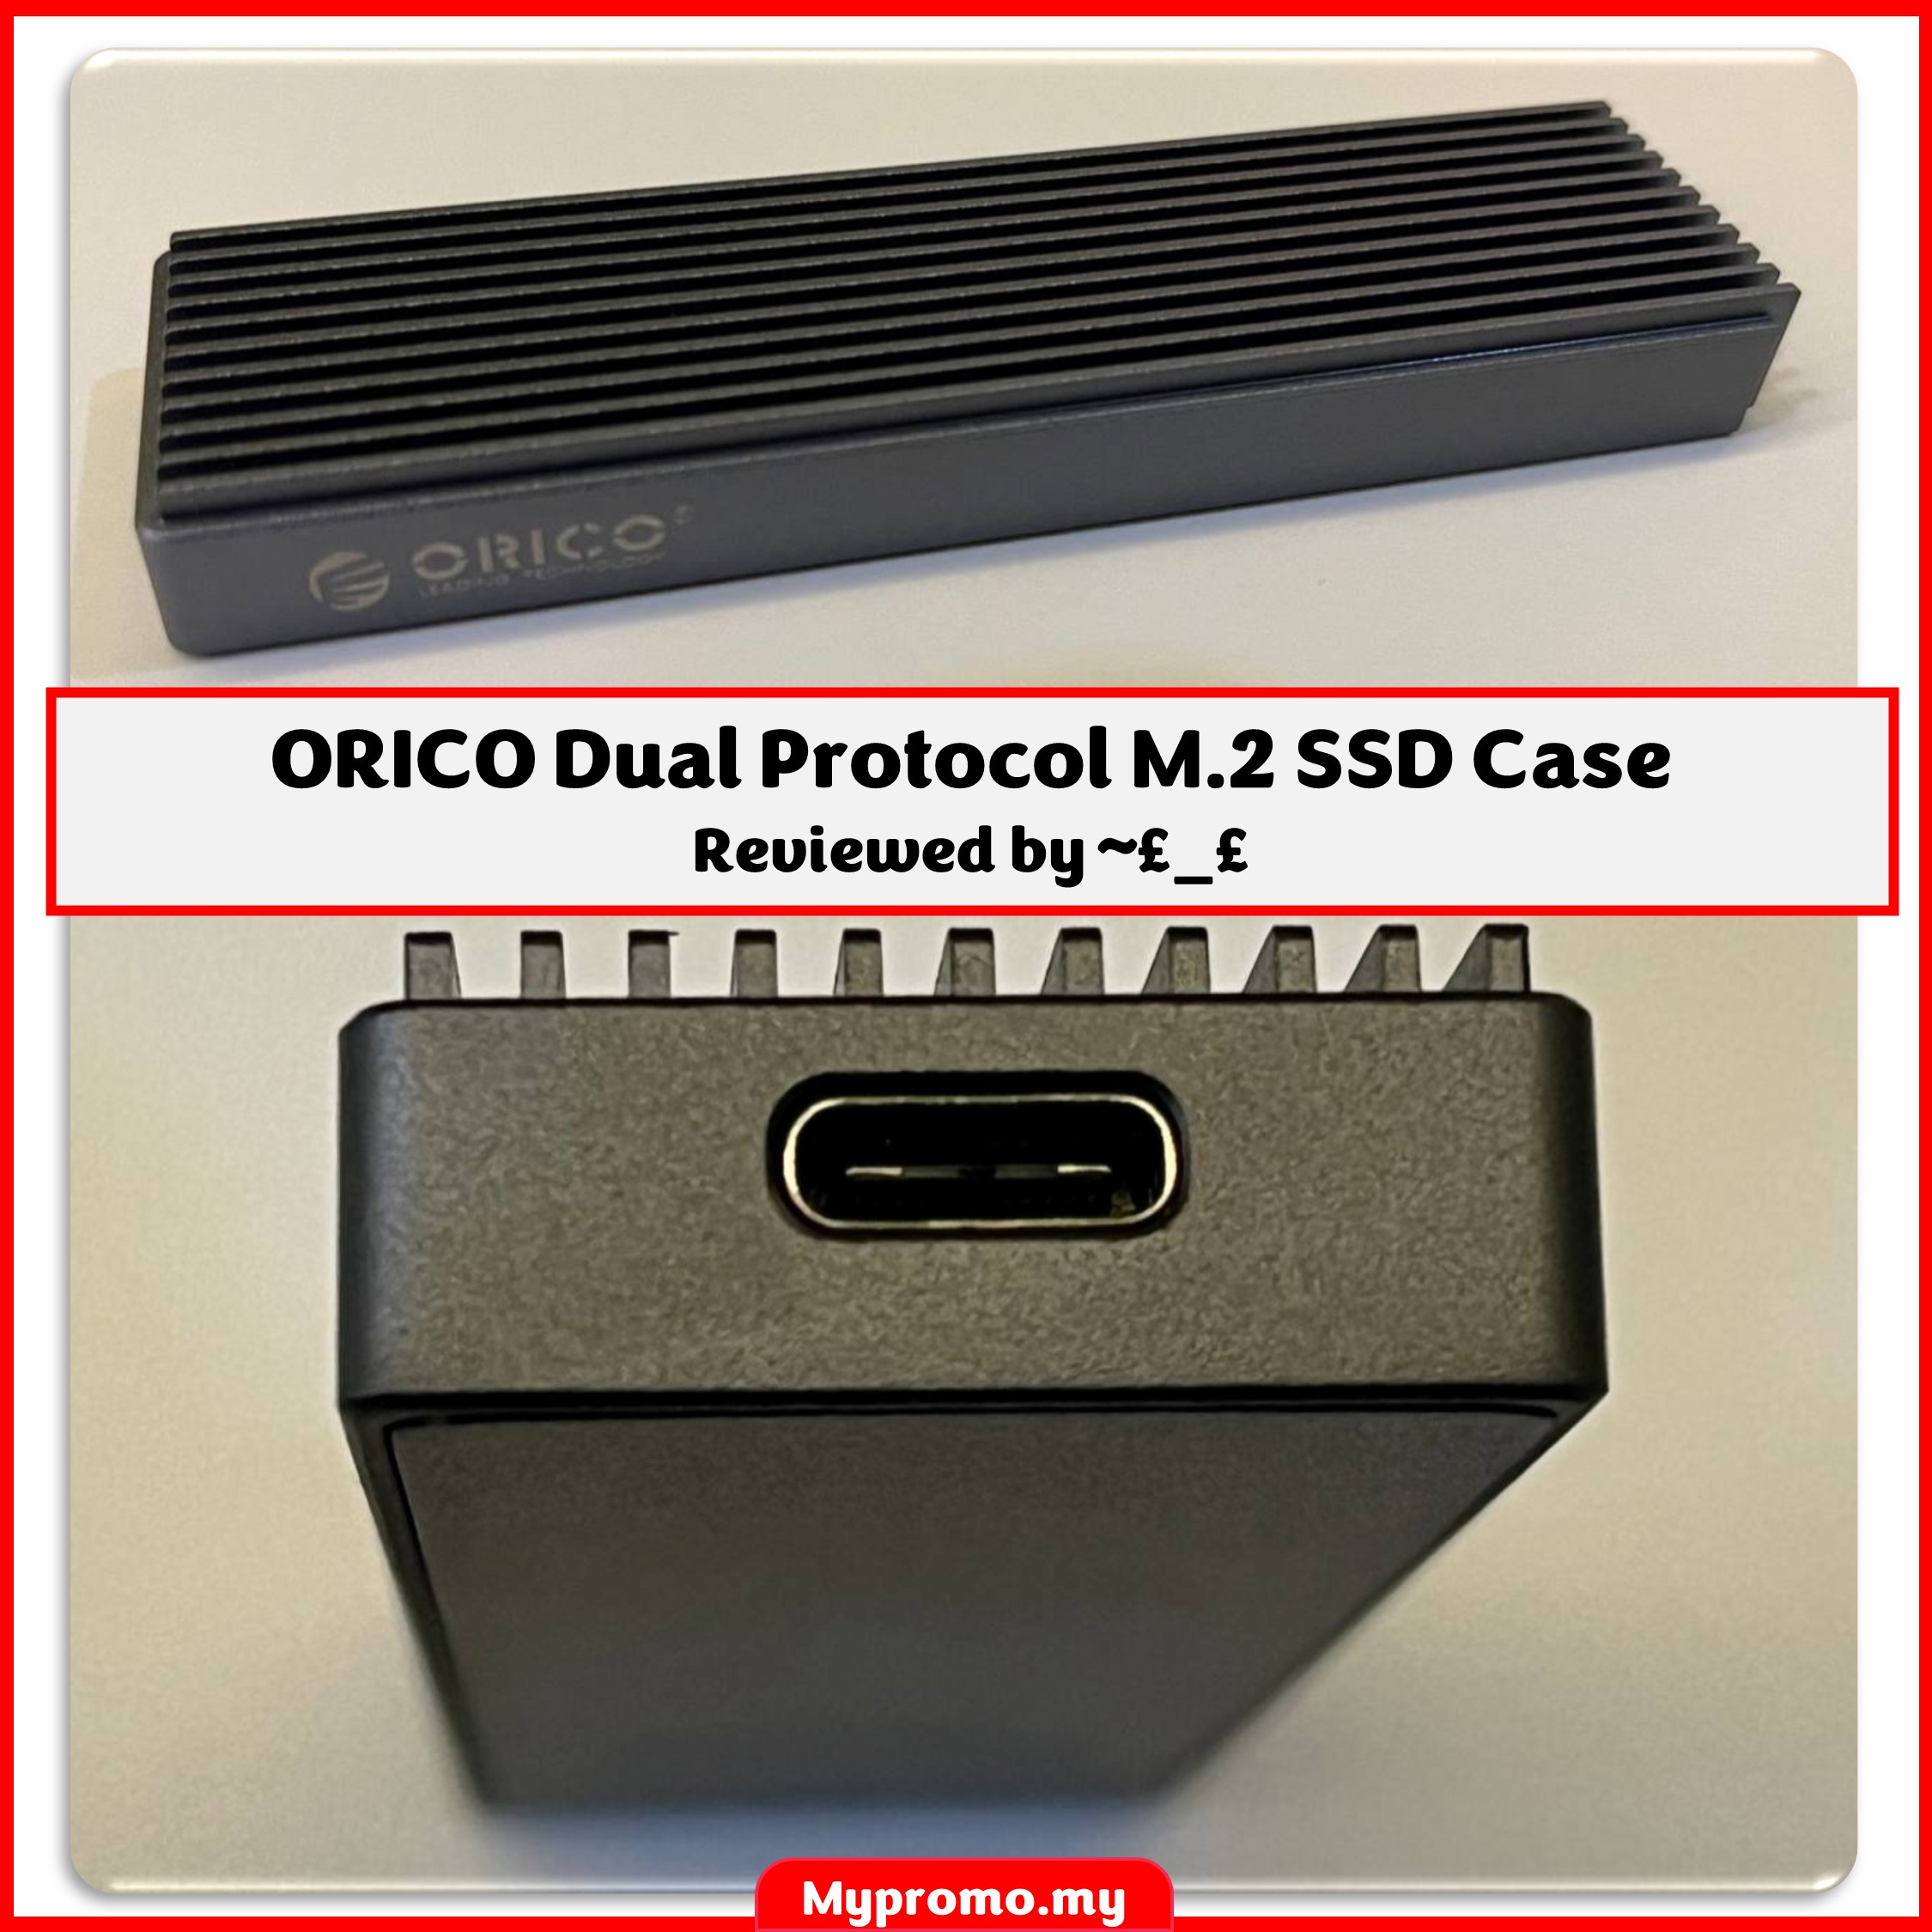 Product Review: ORICO Dual Protocol M.2 SSD Case